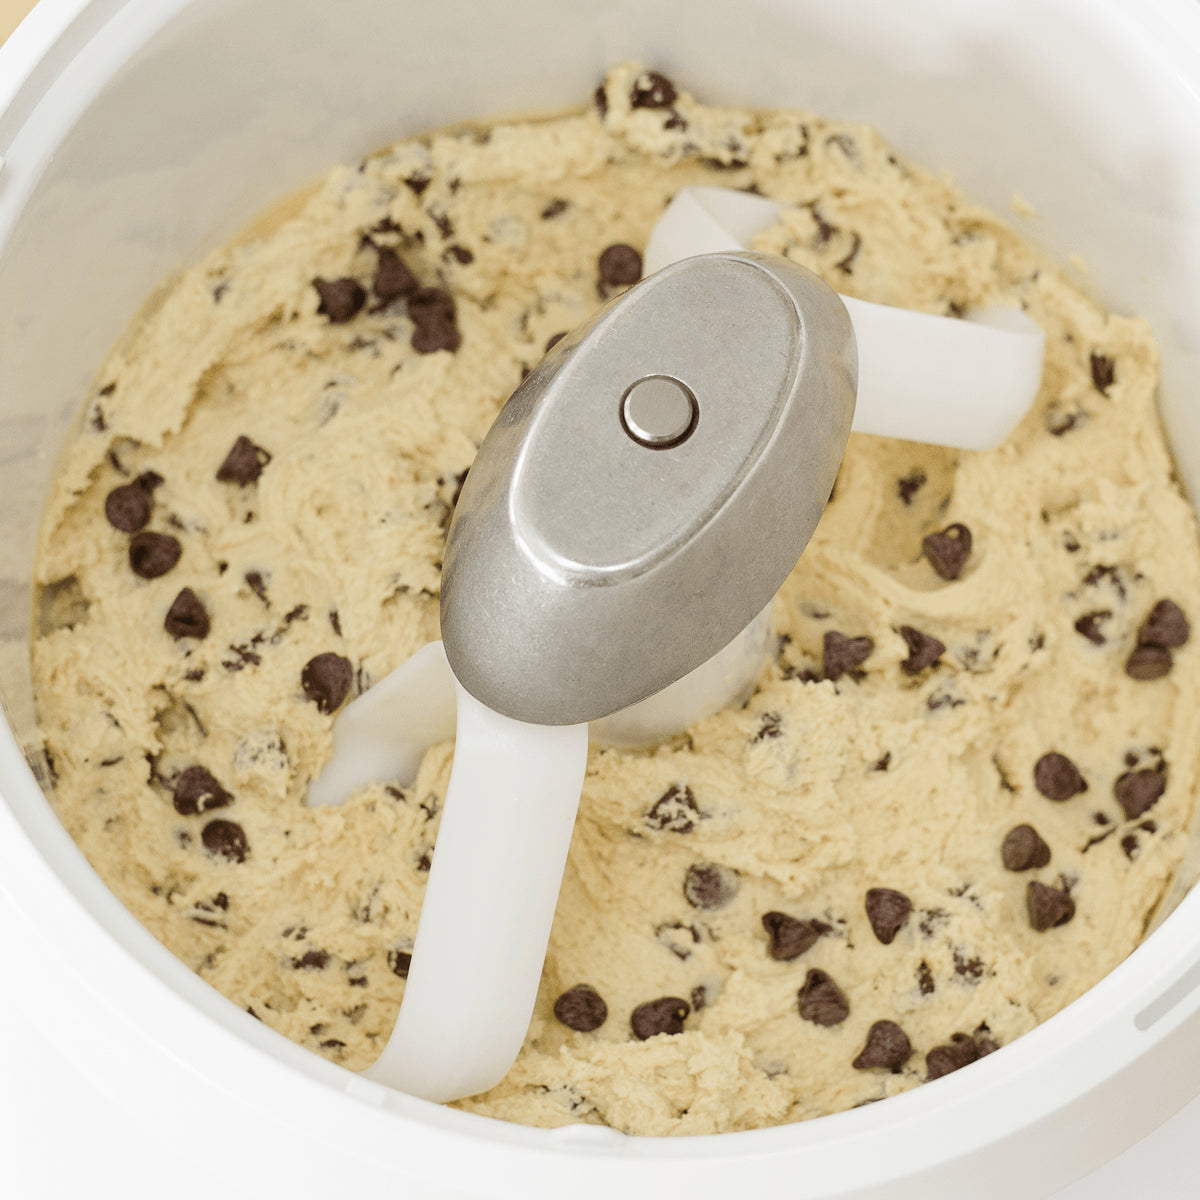 Cookie Paddles mixing cookie dough in artiste mixer bowl